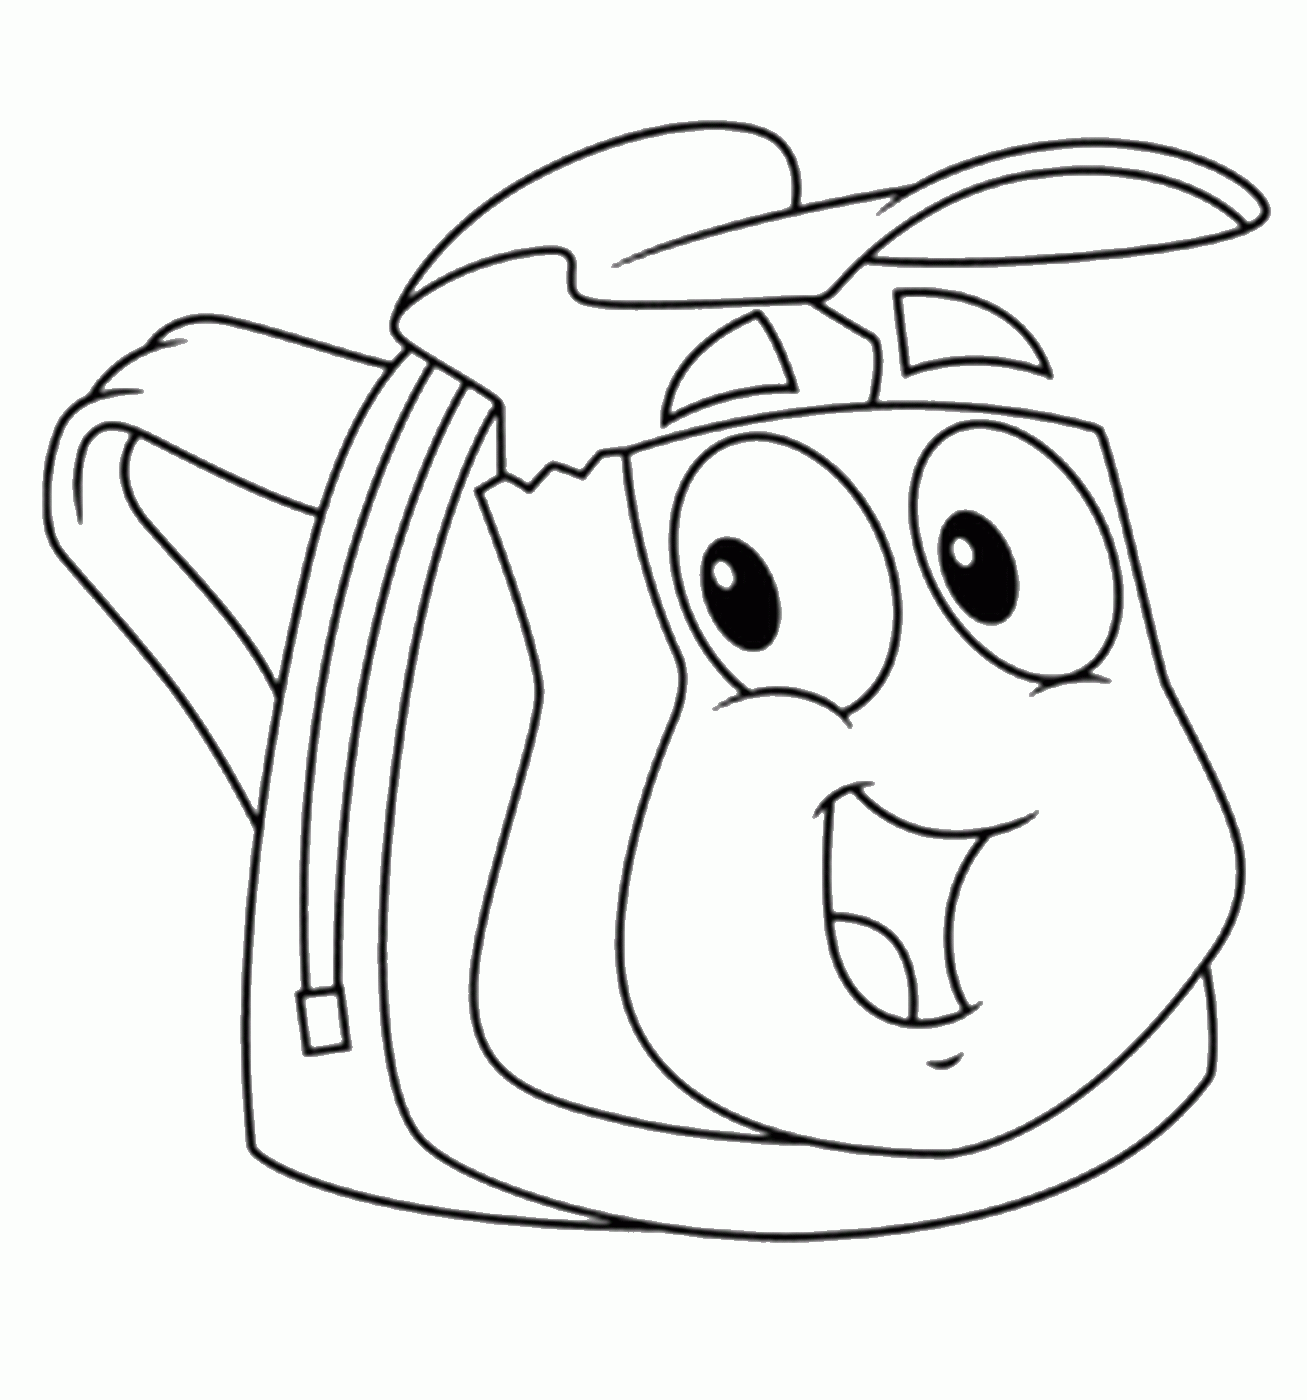 Go Diego Go Coloring Pages Cartoons run_diego_cl_26 Printable 2020 2965 Coloring4free